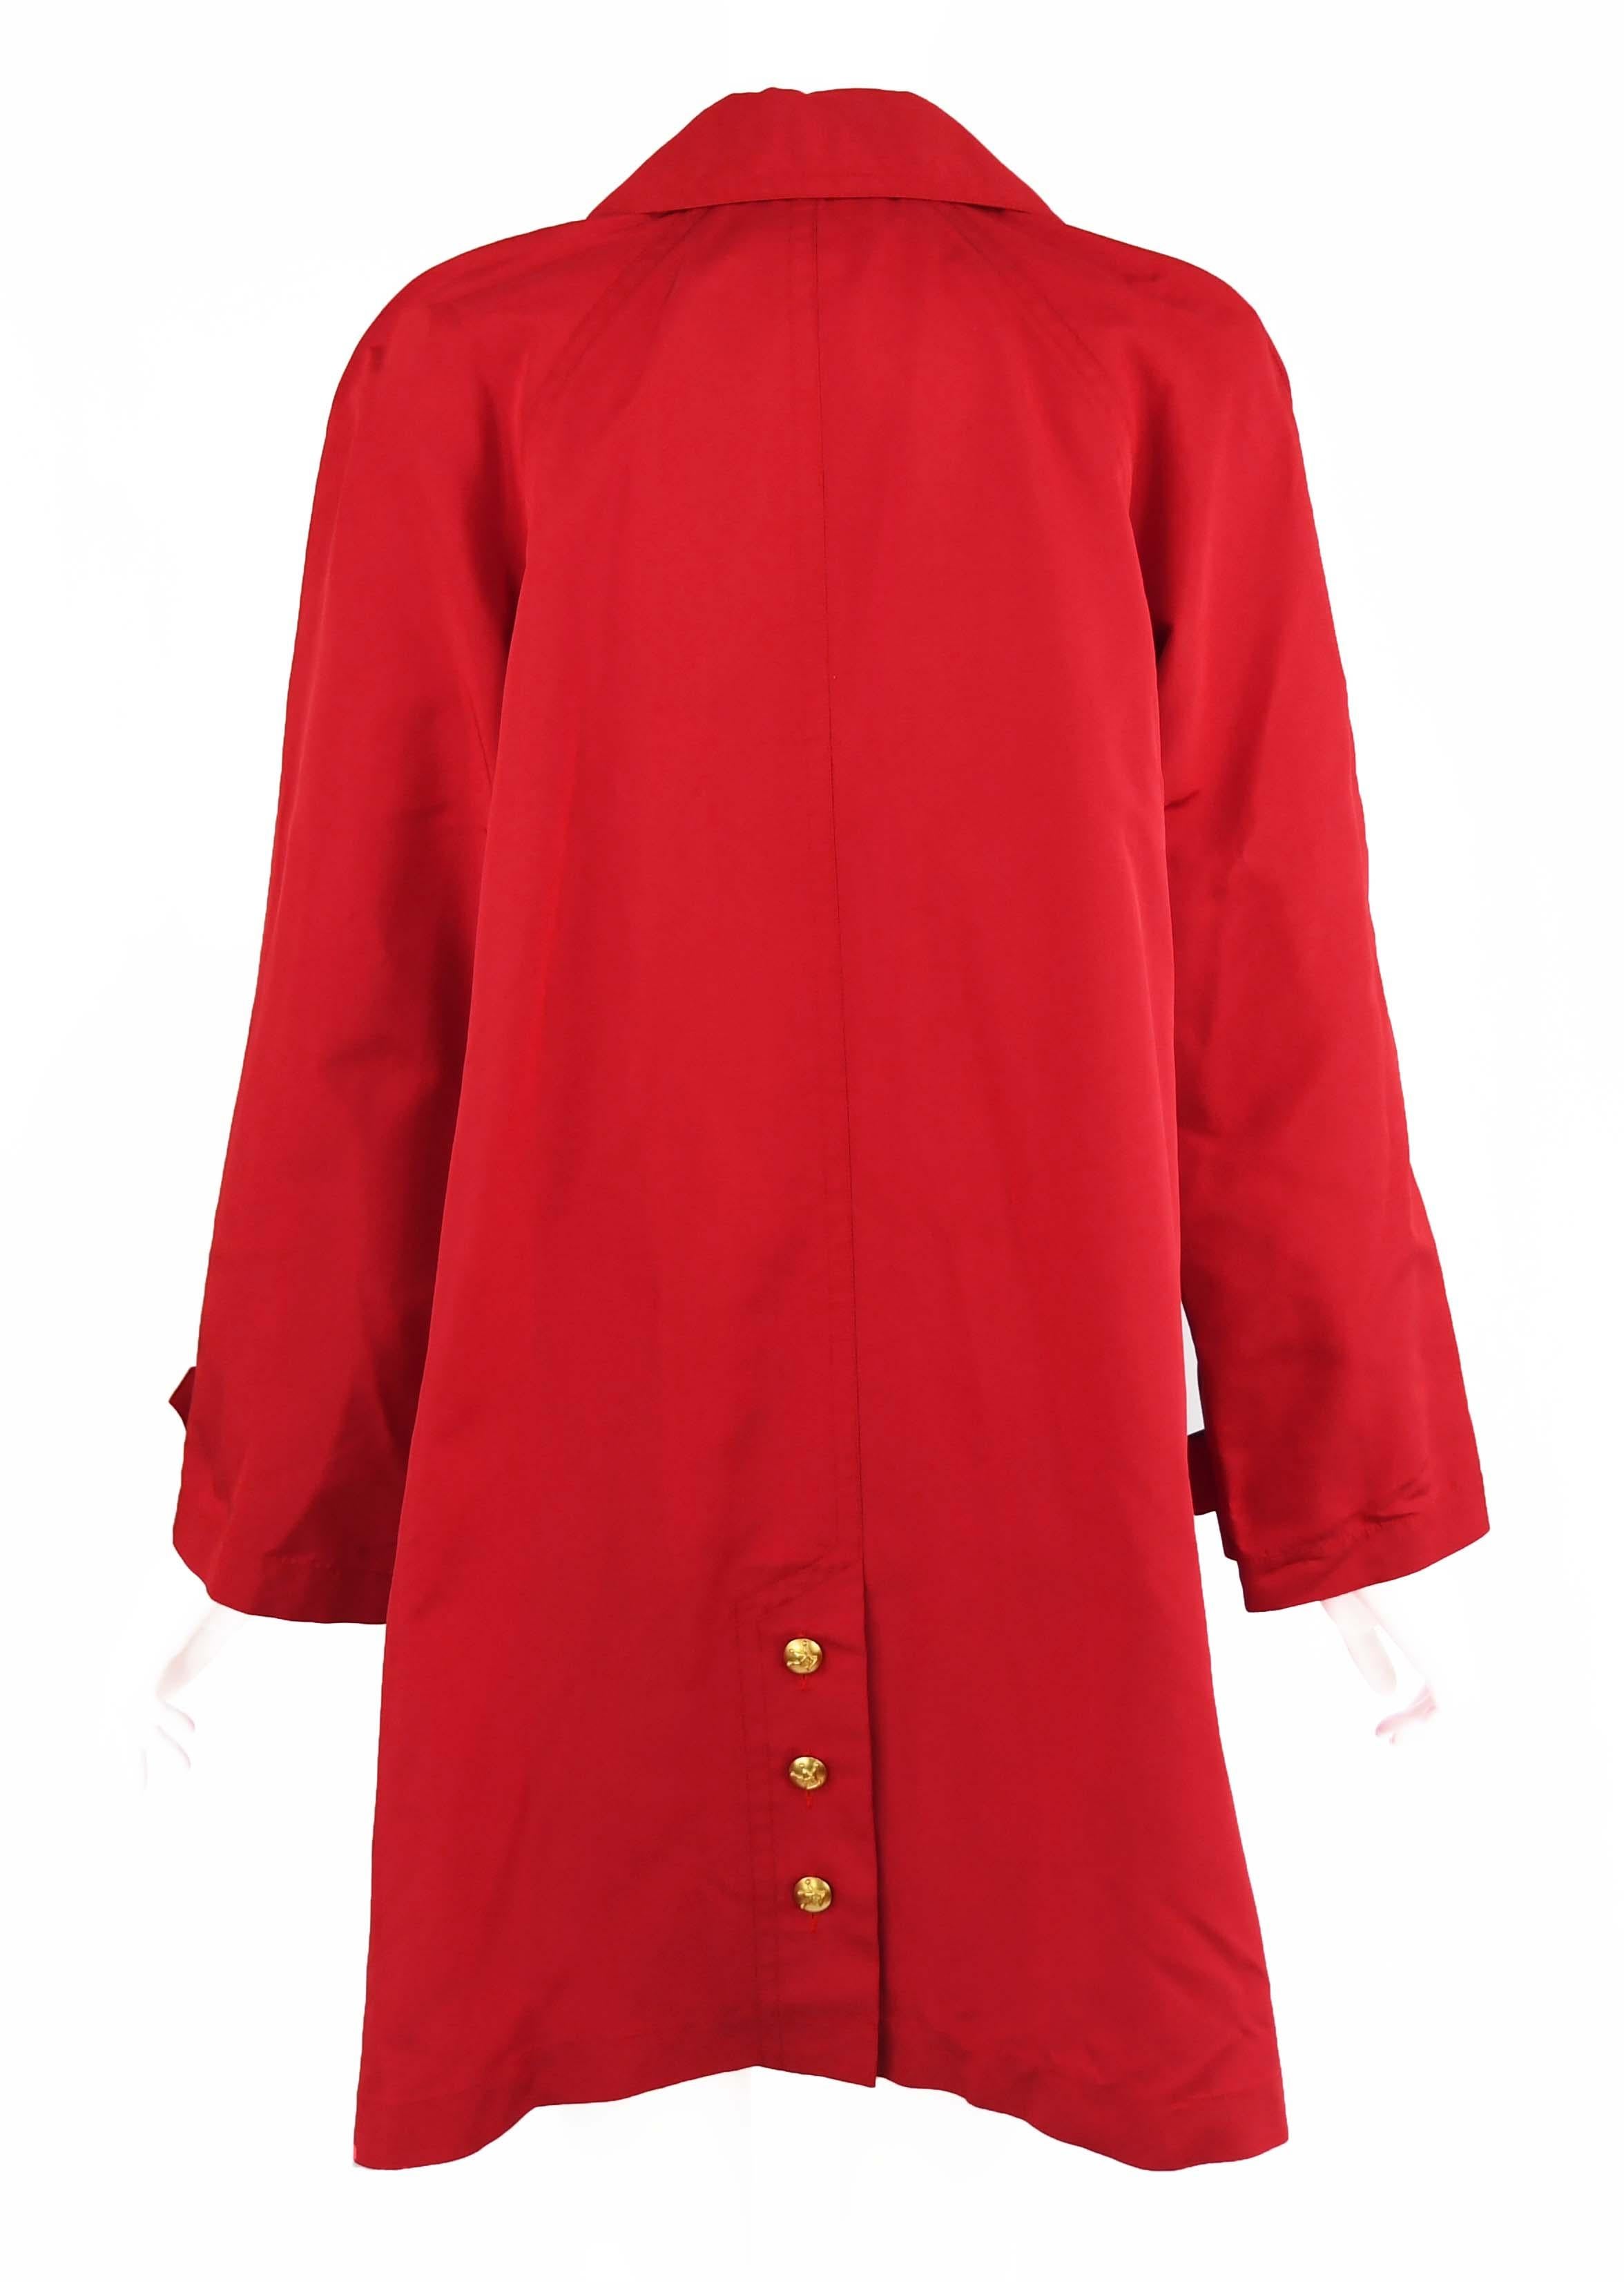 Women's Chanel Vintage Red Rain Coat with Gold Buttons - Size FR 34 For Sale